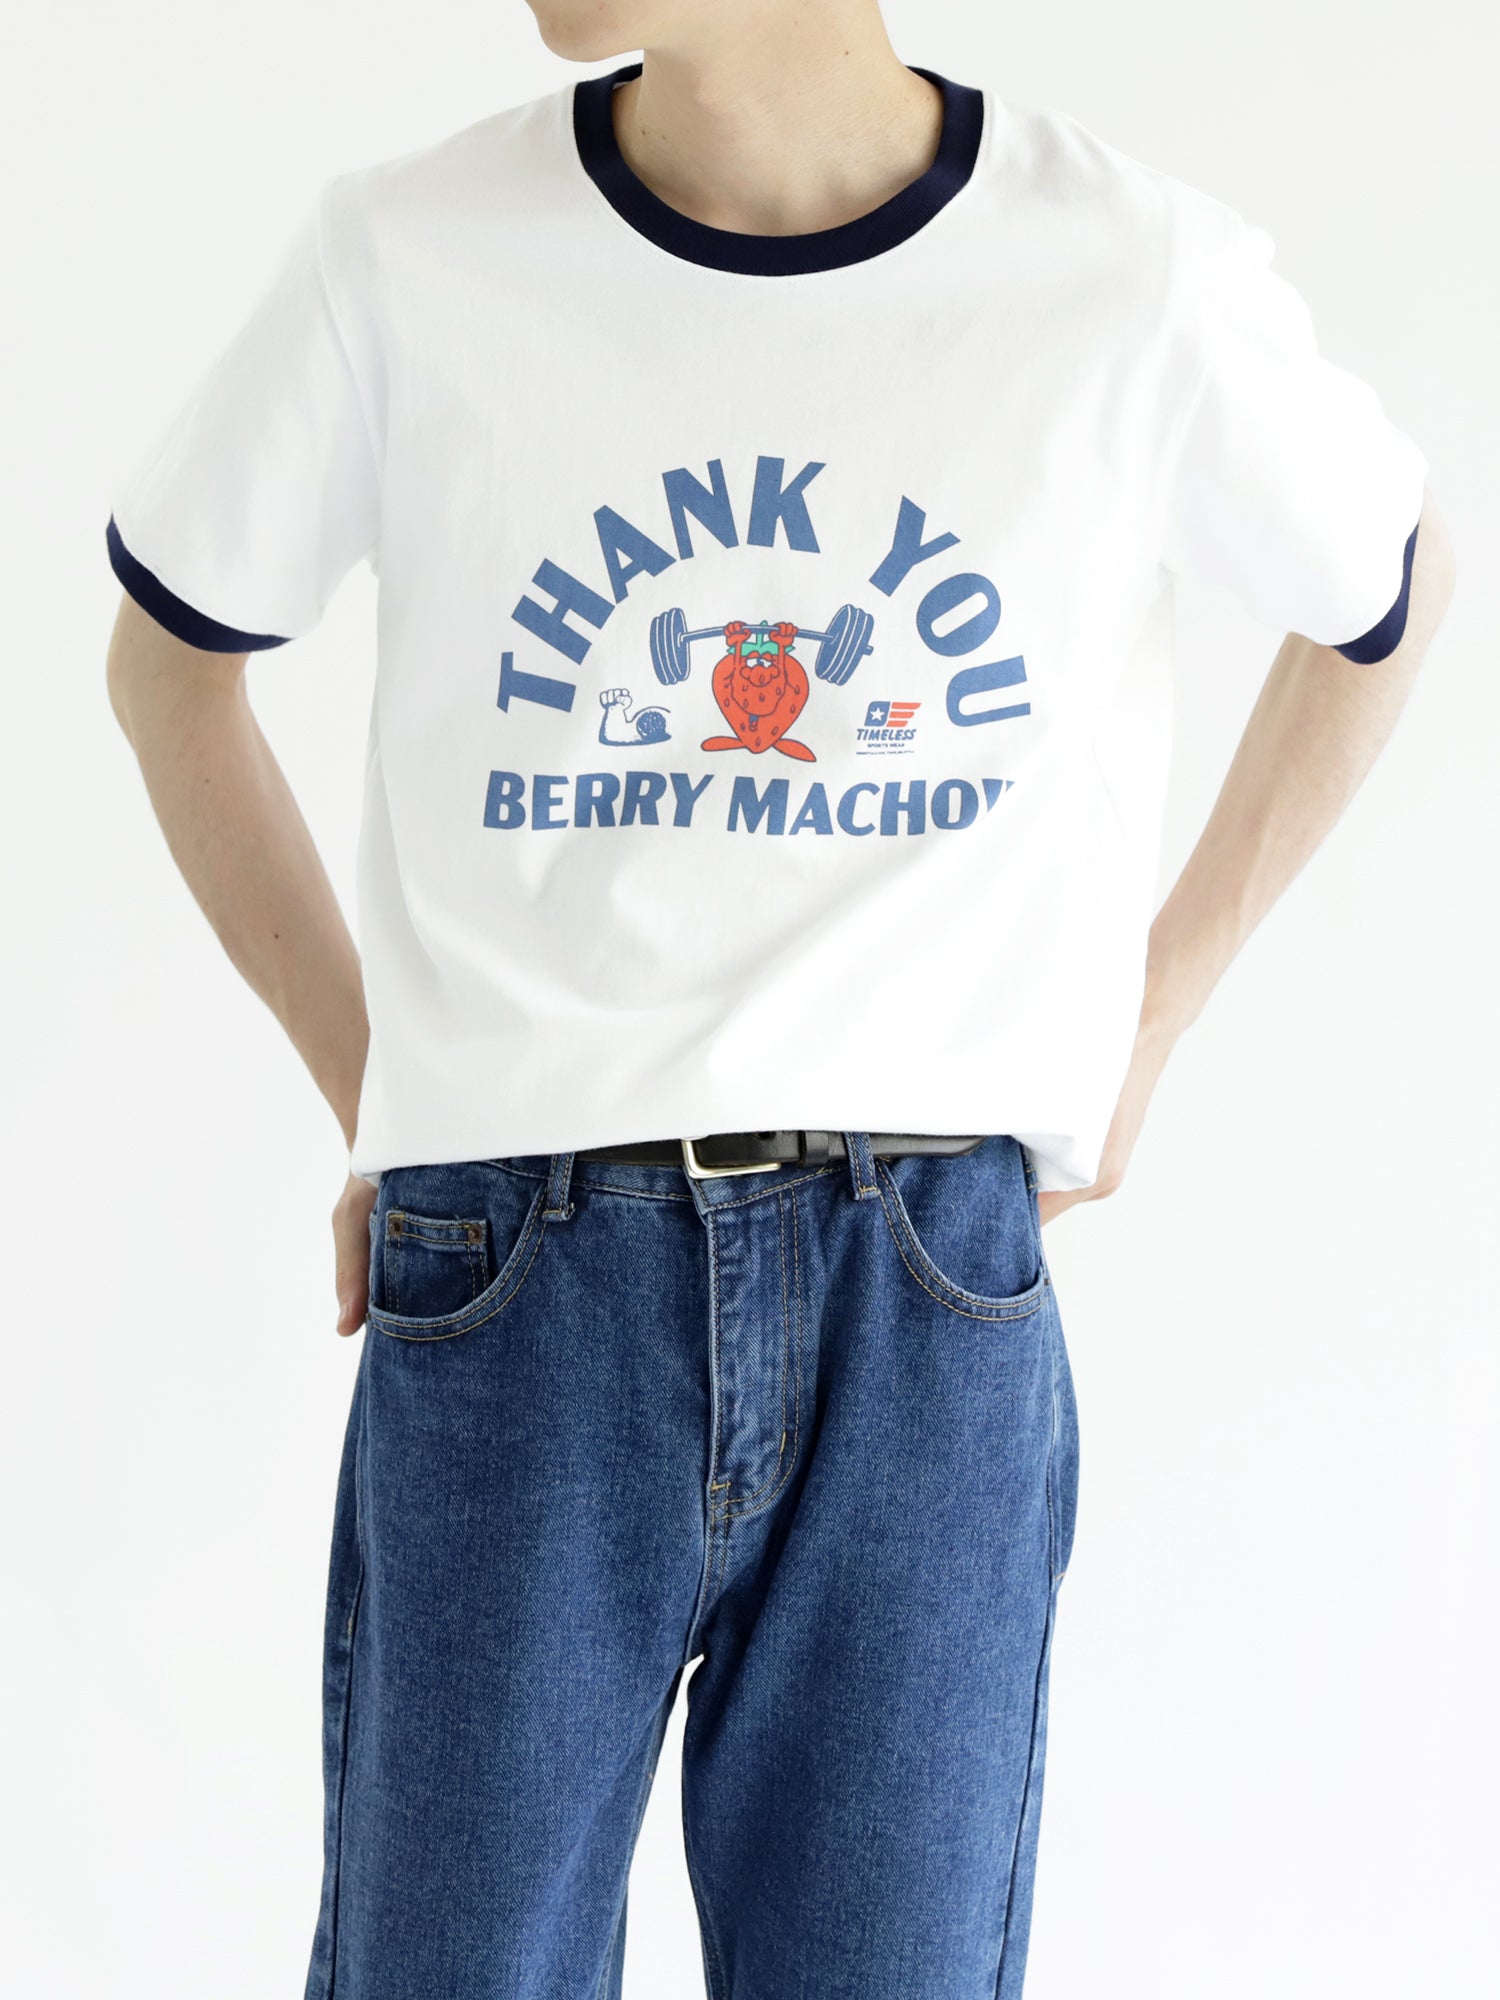 AFS "BERRY" 9.5oz RINGER TEE